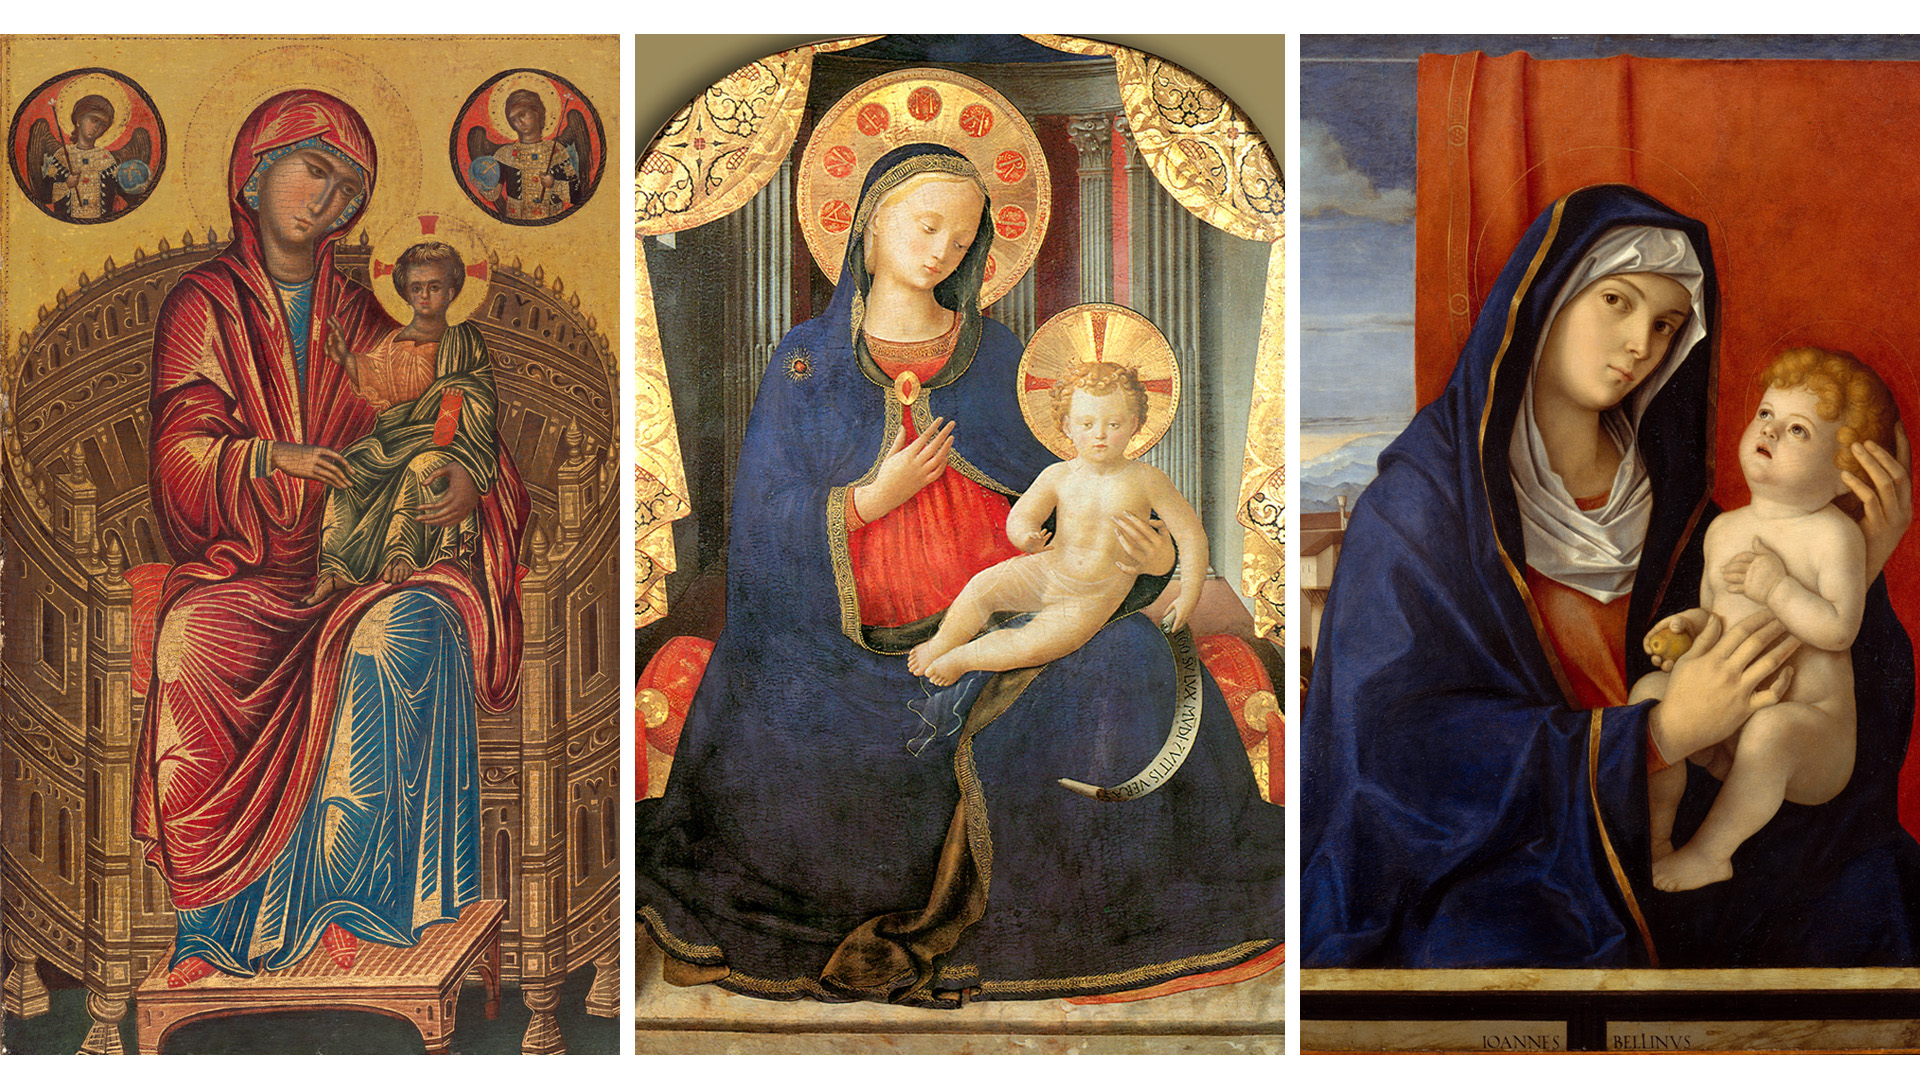 Paintings of the Virgin Mary with Jesus as a Child